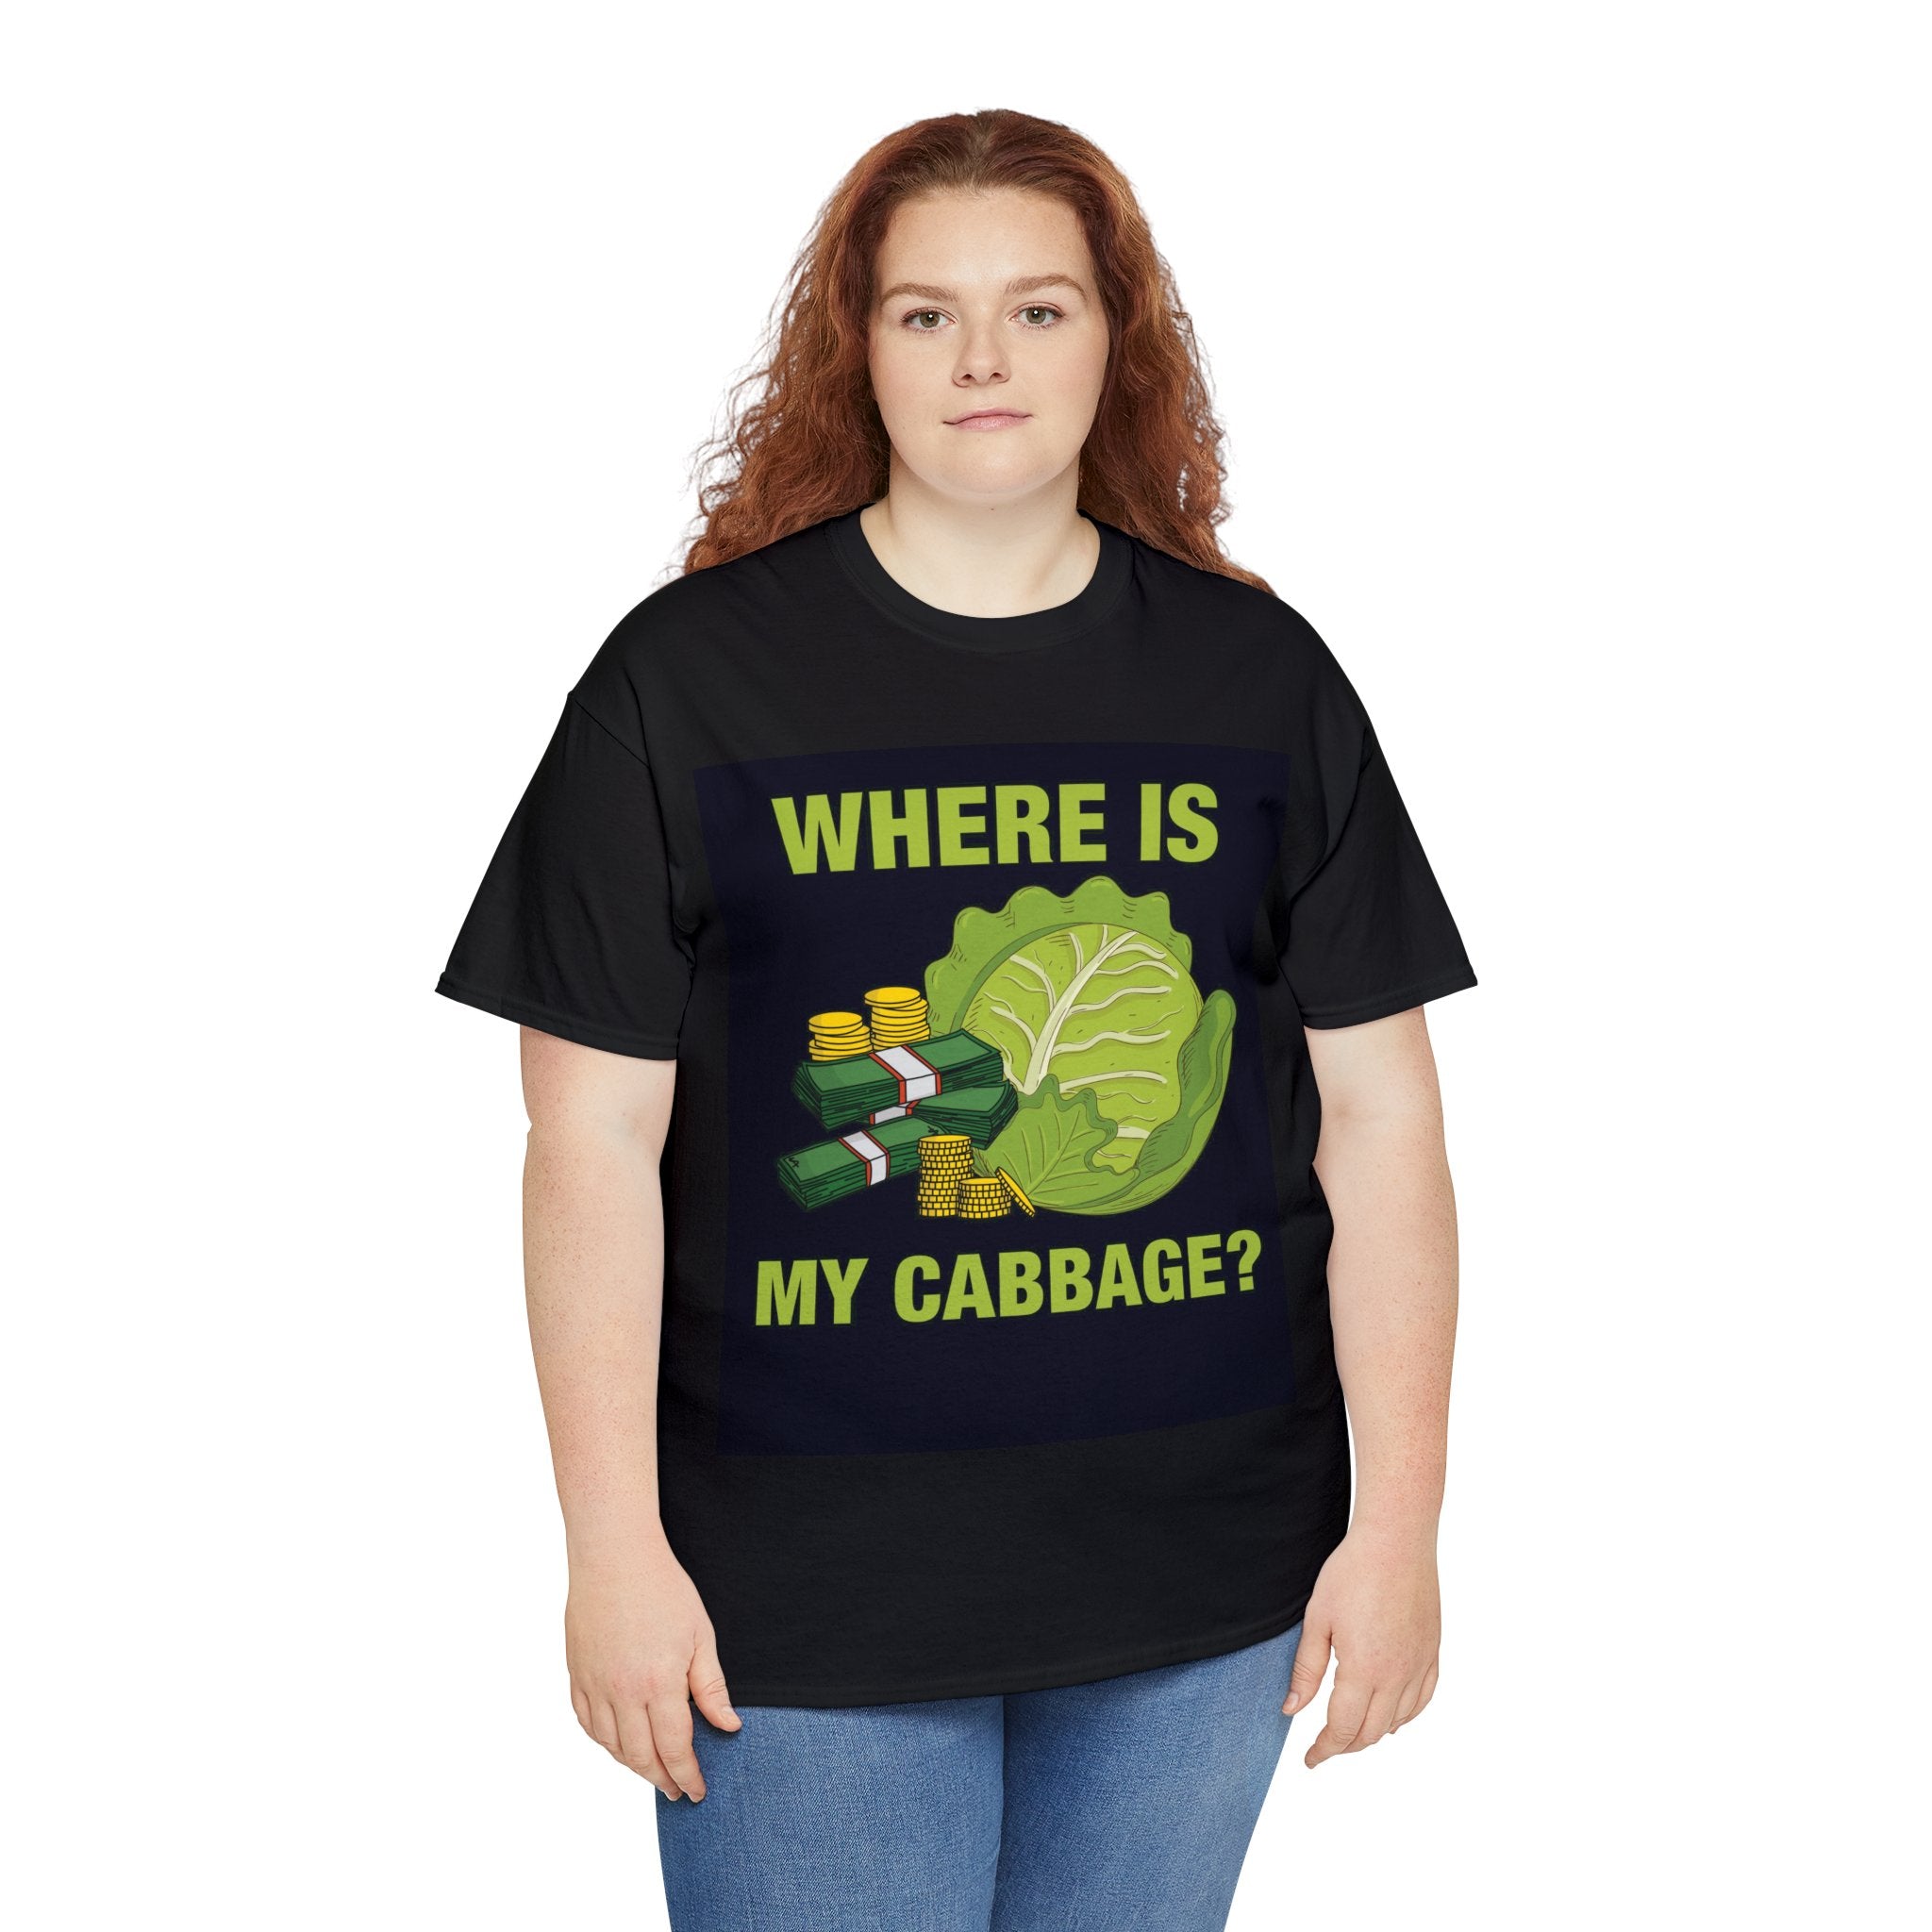 WHERE IS MY CABBAGE? Unisex Tee